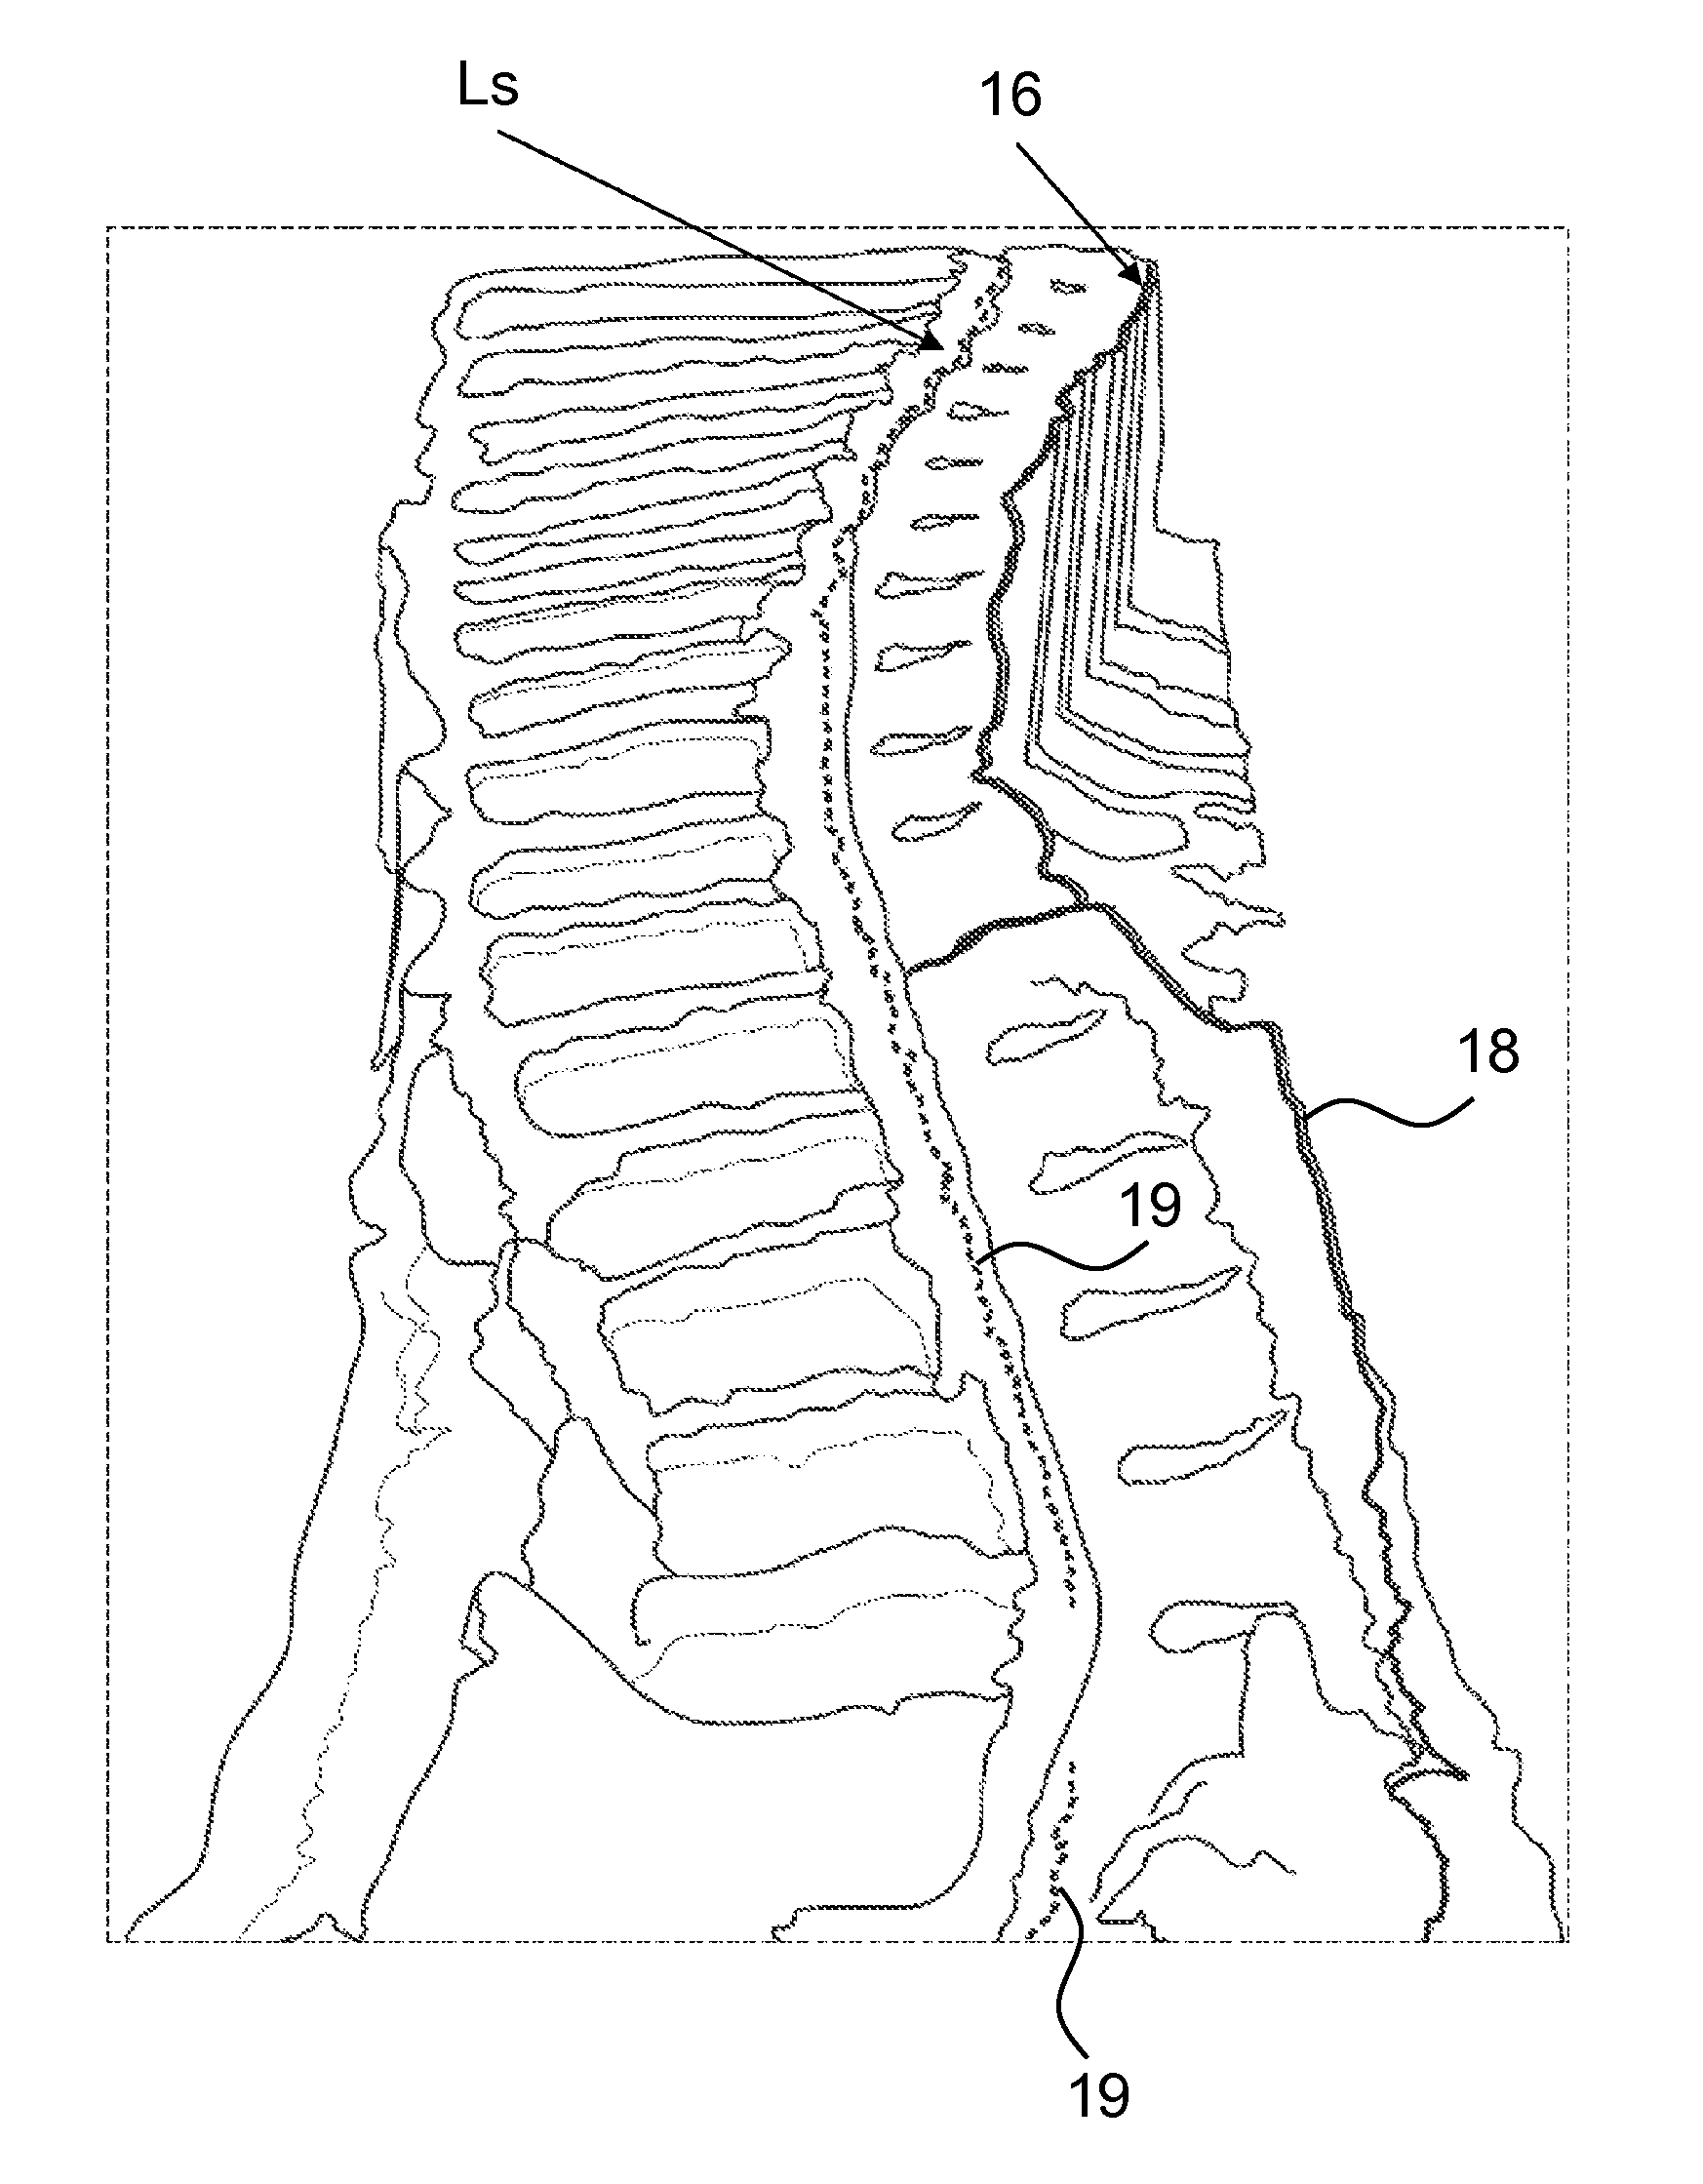 Separation of the spinal column from a carcass middle part